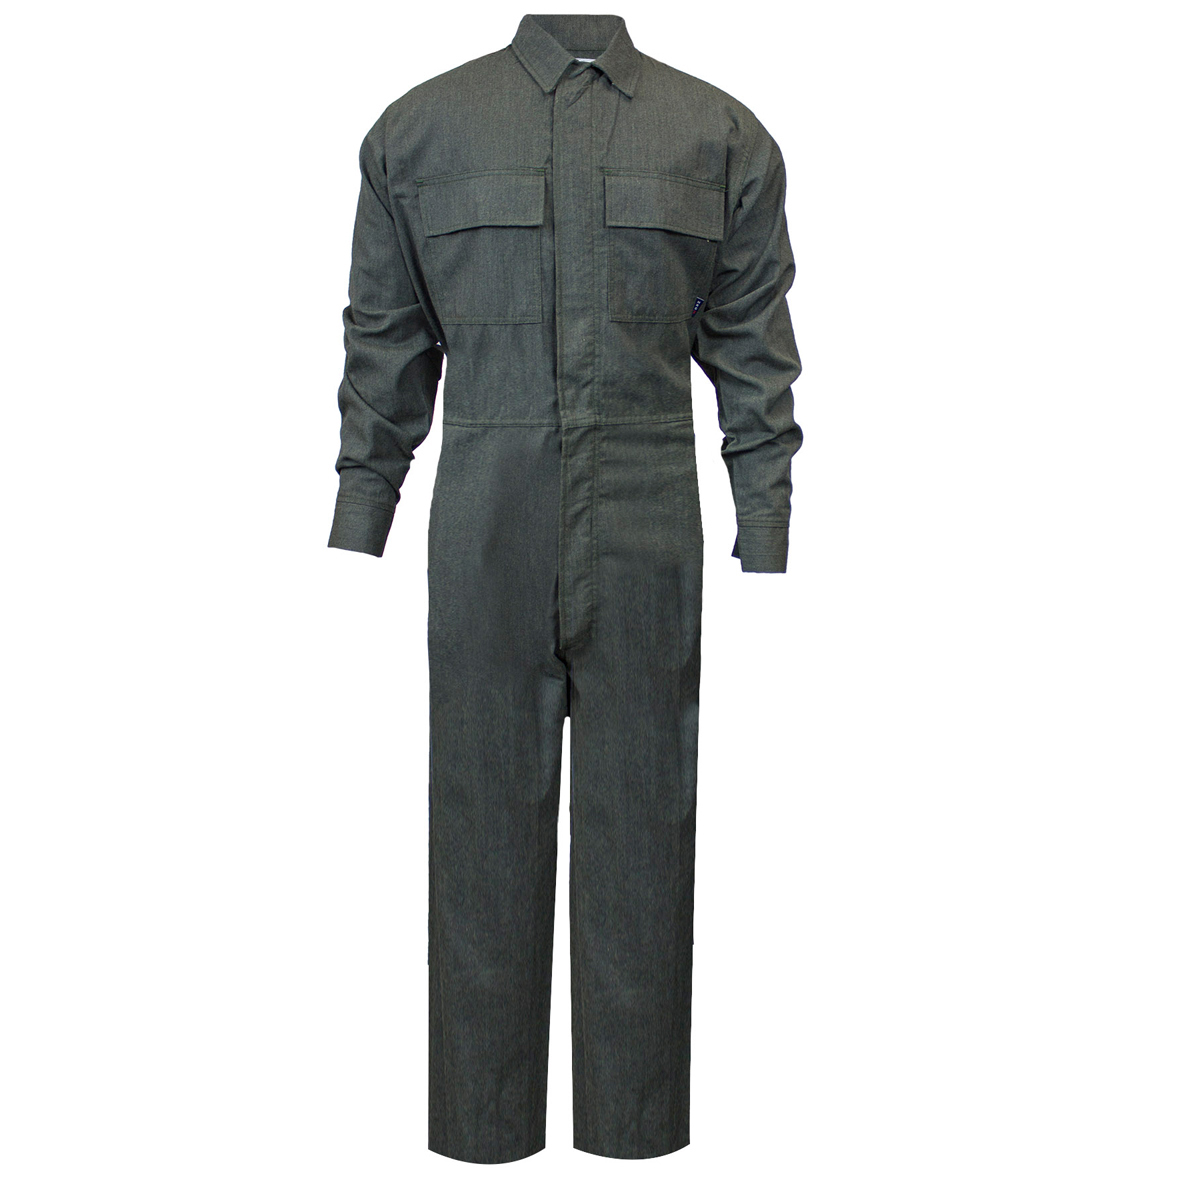 National Safety Apparel 3X Regular Green OPF Blend Twill CARBON ARMOUR™ Welding Flame Resistant Coverall With Zipper Front Closu